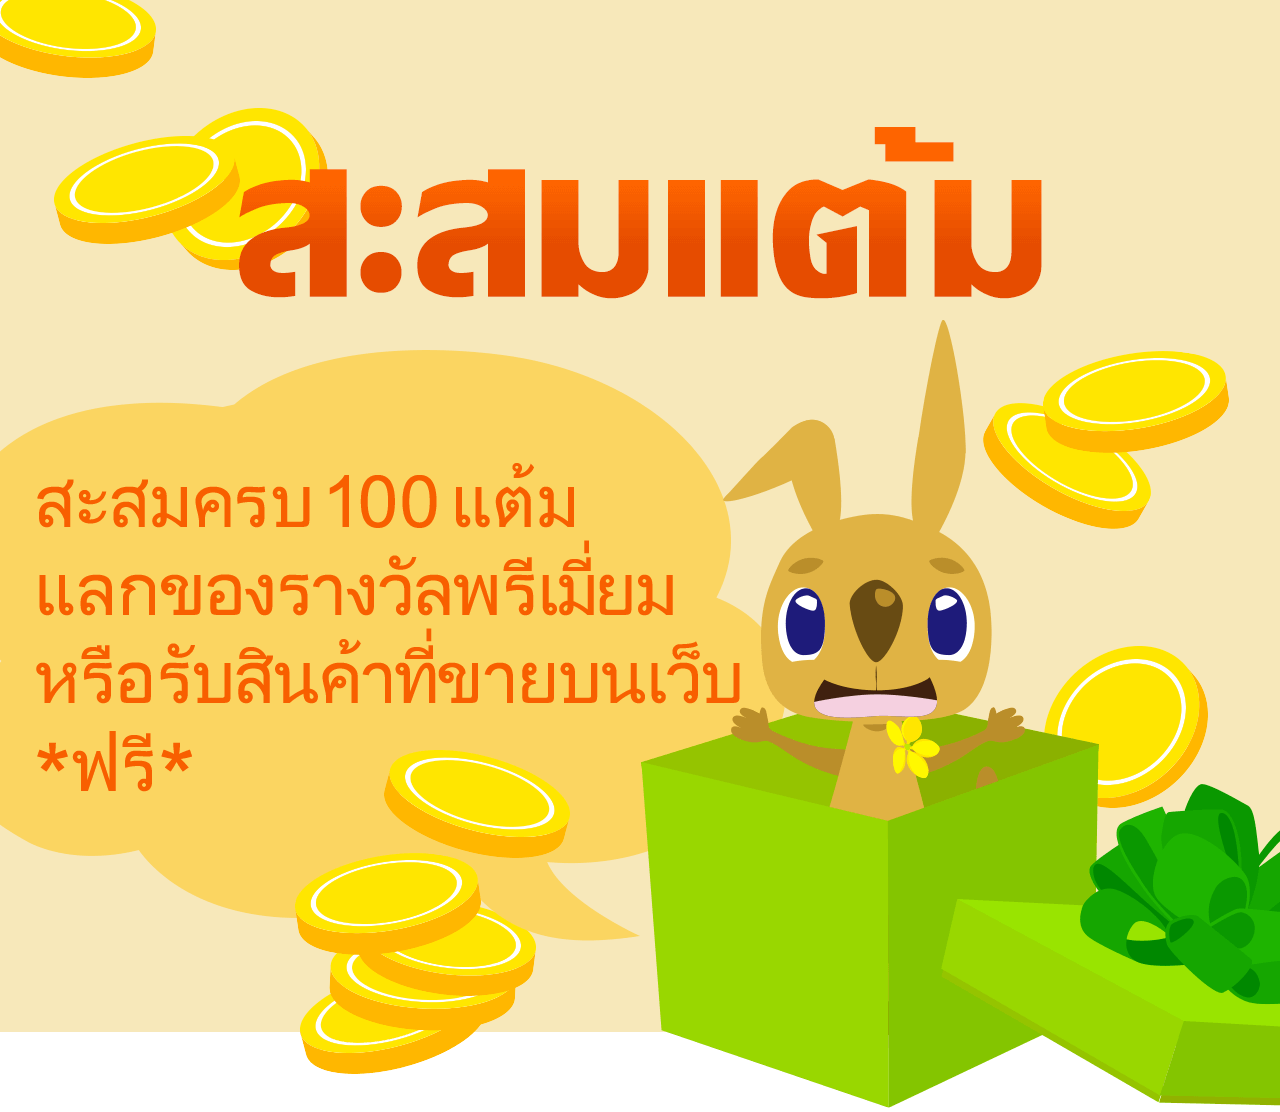 Special Promotion Set รีวิว